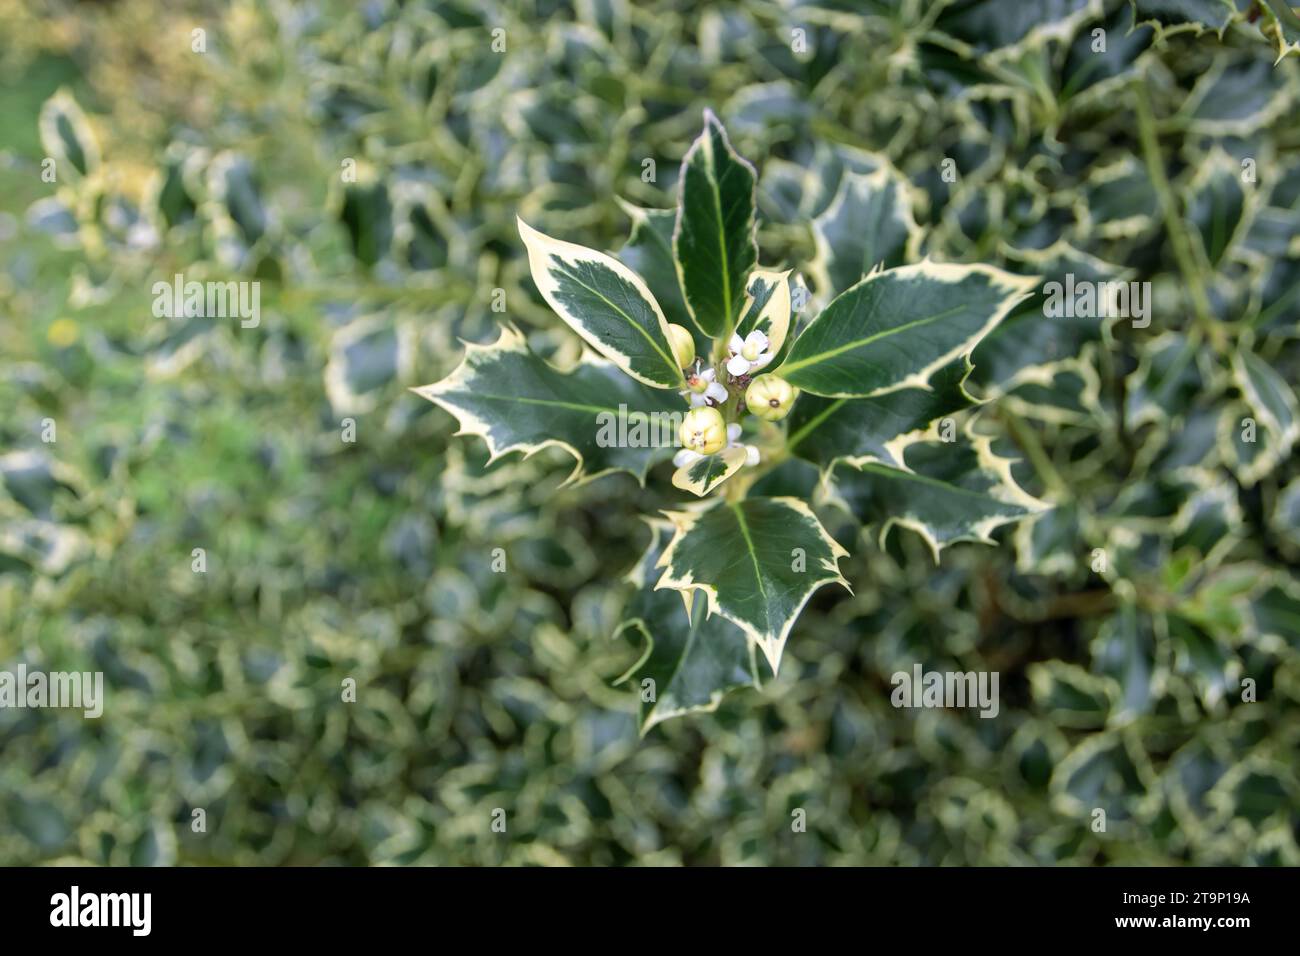 Ilex aquifolium variegated female plant with white four-lobed flowers and unripe fruits. Christmas holly in the garden. Evergreen shrub cultivar. Stock Photo